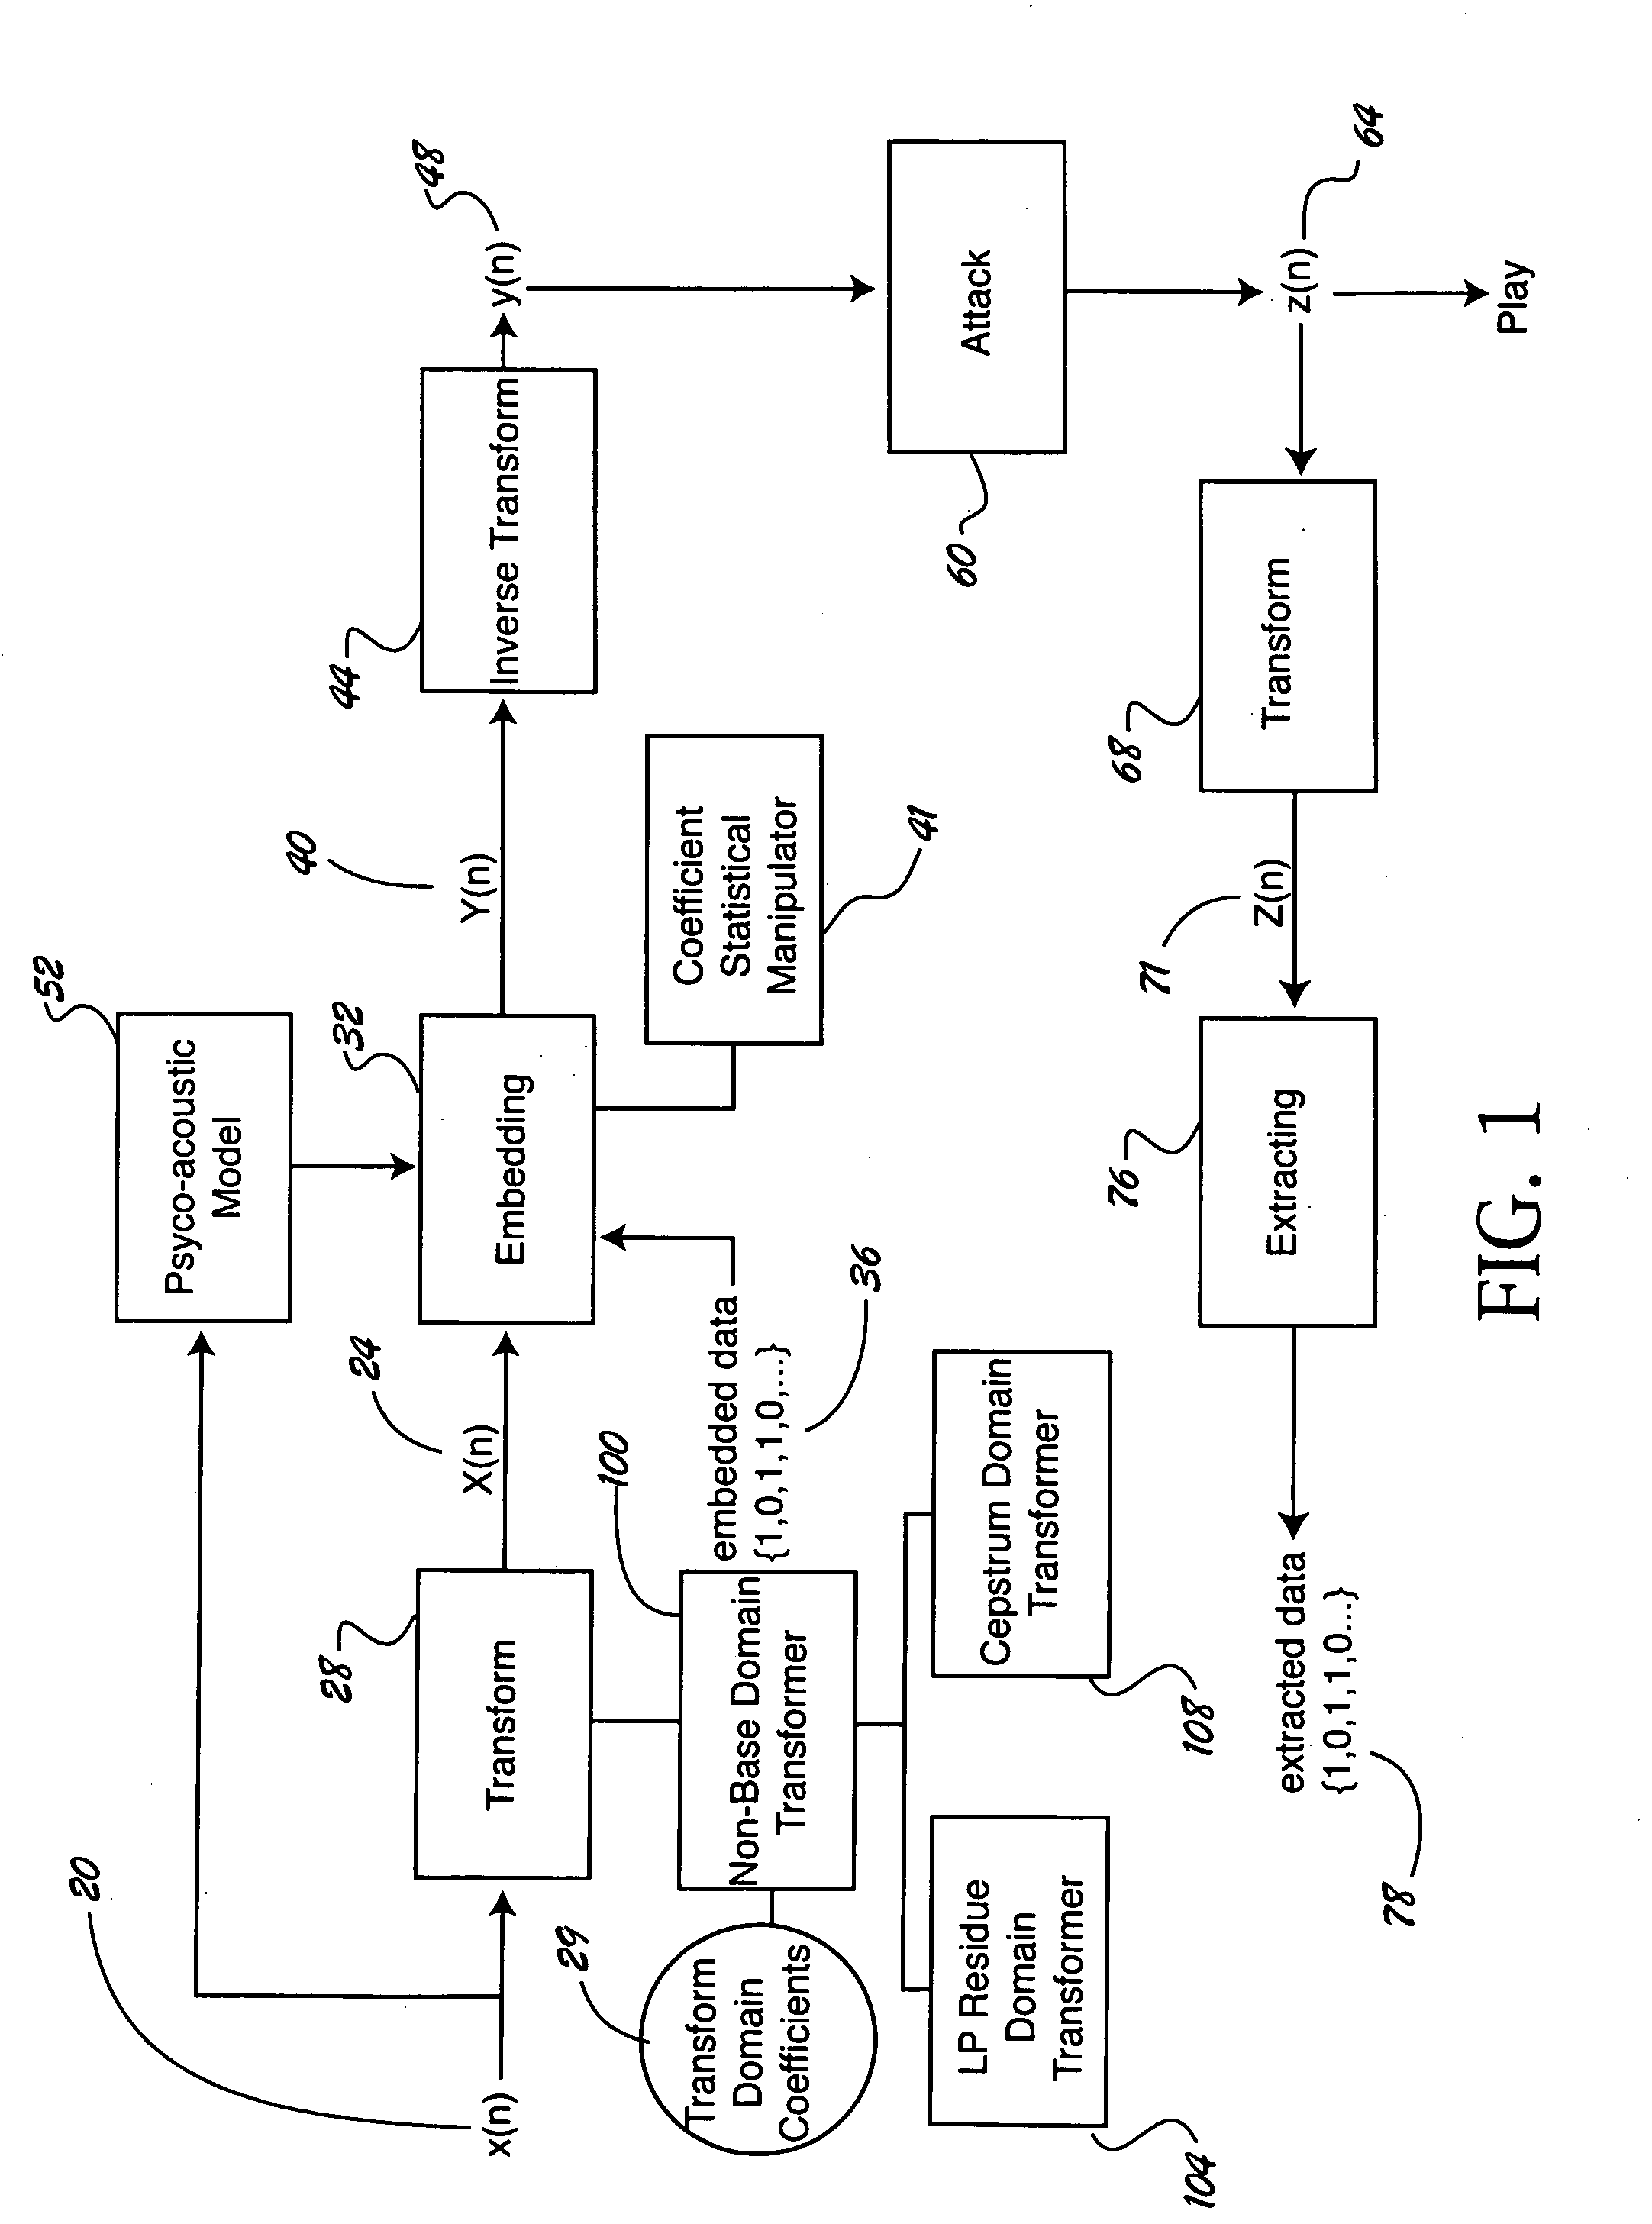 Computer-implemented method and apparatus for audio data hiding